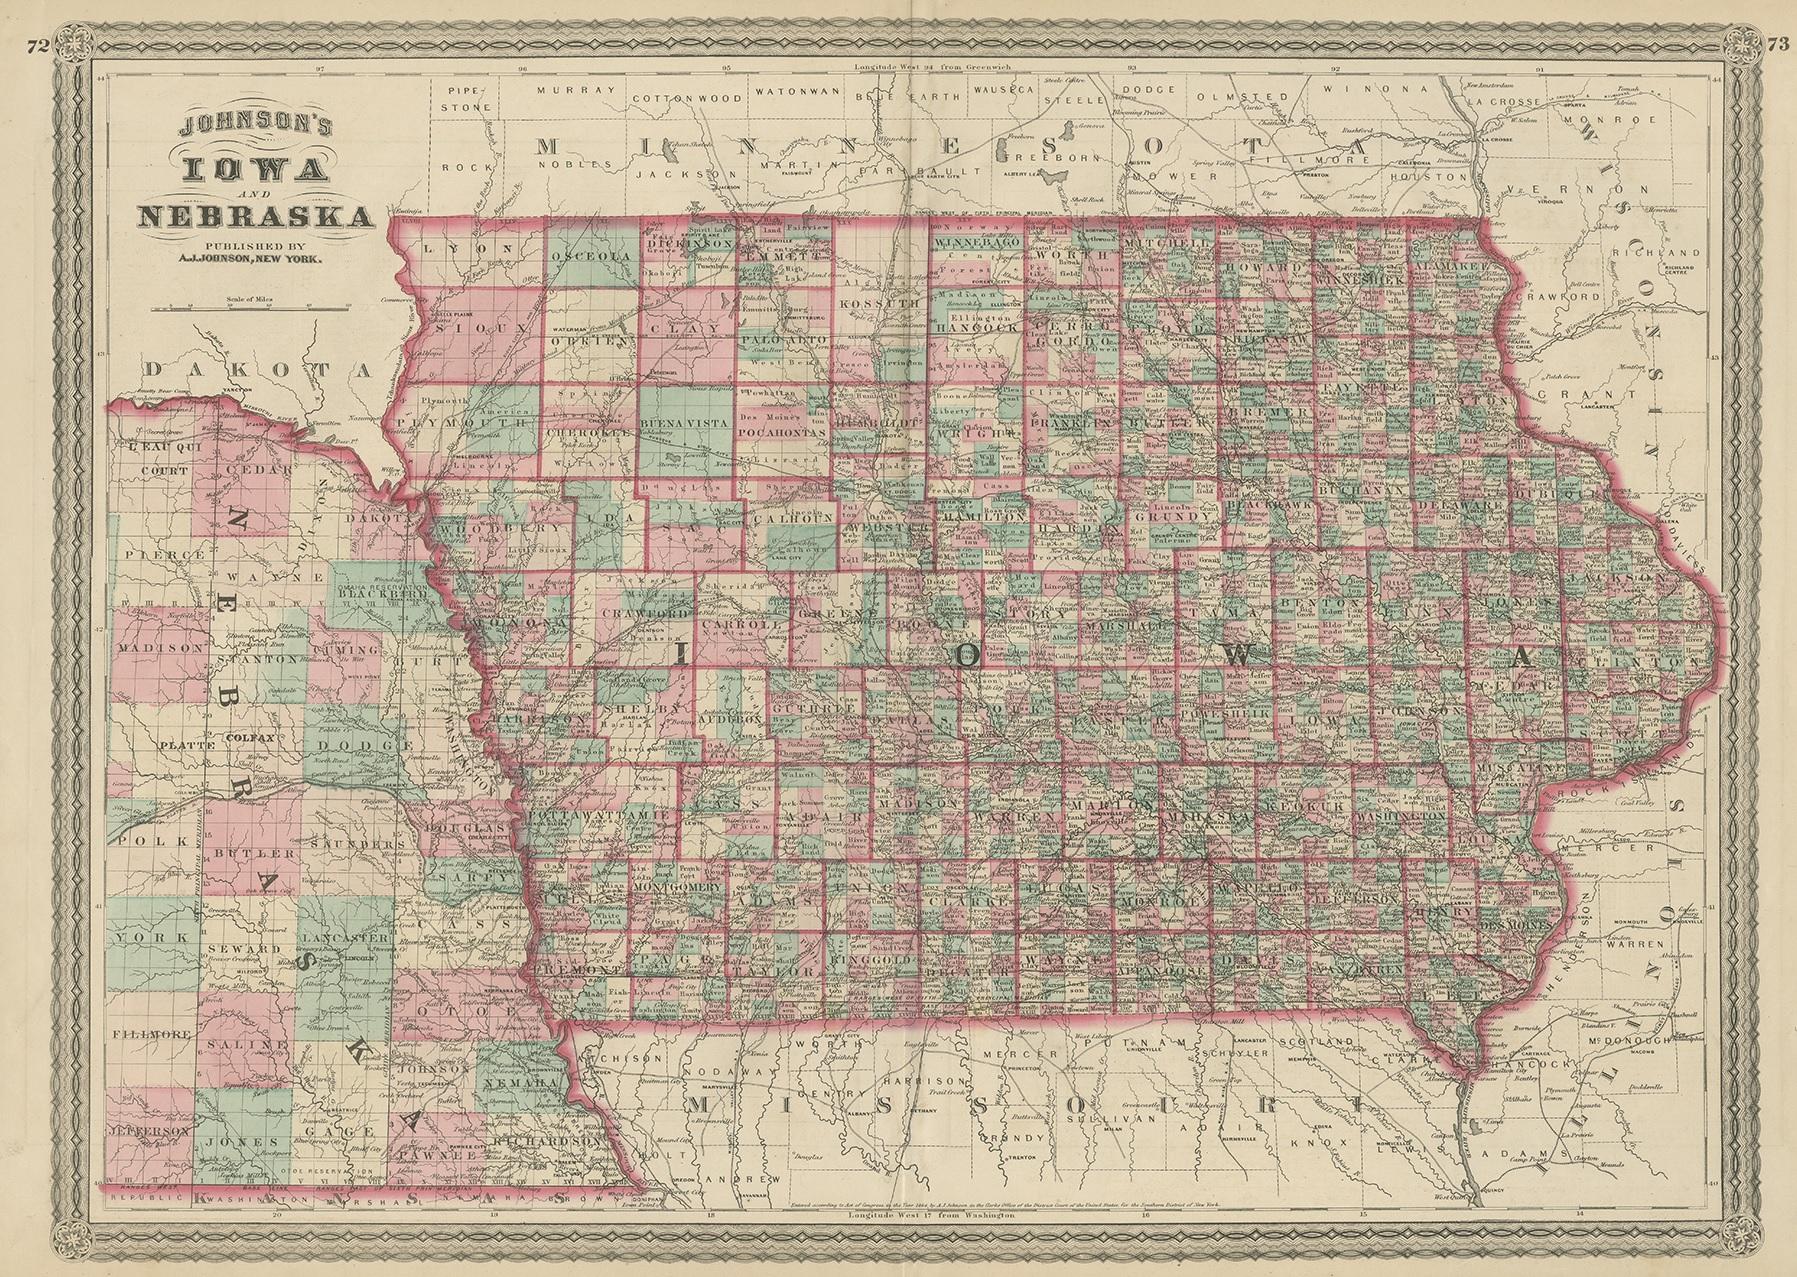 Antique map titled 'Johnson's Iowa and Nebraska'. Original map of Iowa and Nebraska. This map originates from 'Johnson's New Illustrated Family Atlas of the World' by A.J. Johnson. Published 1872.